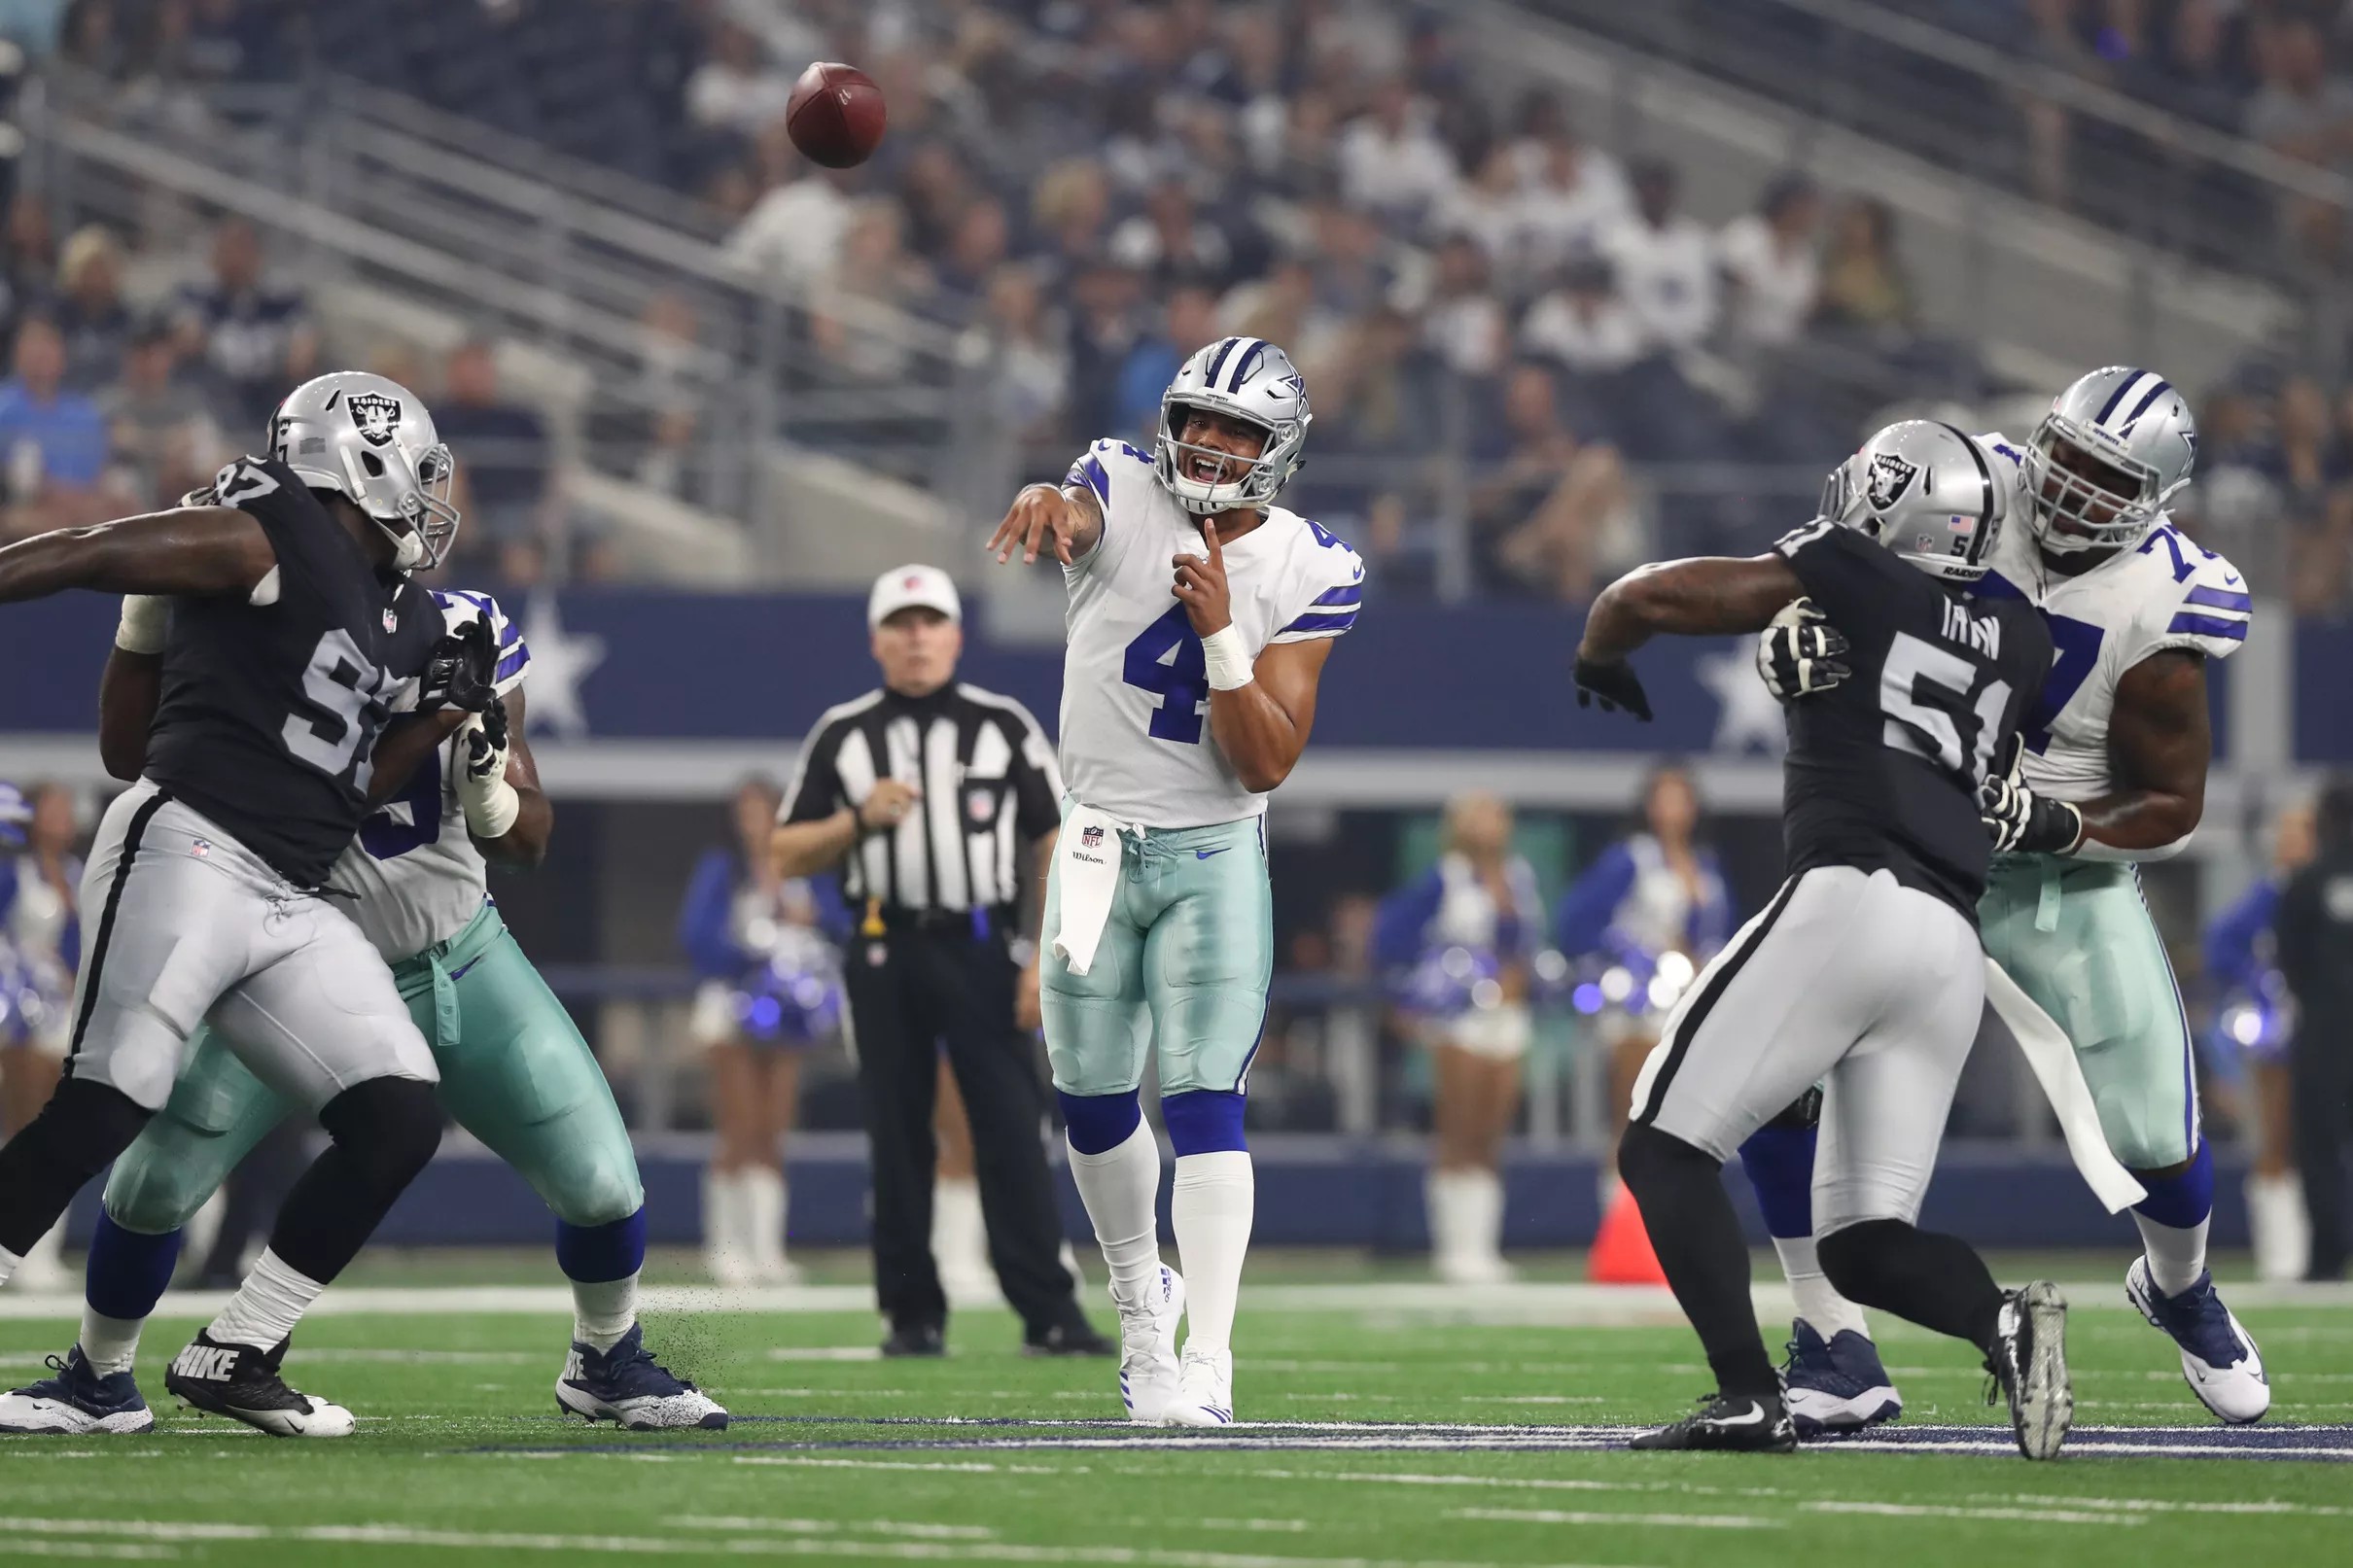 CowboysRaiders fantasy football preview Who to start, sit